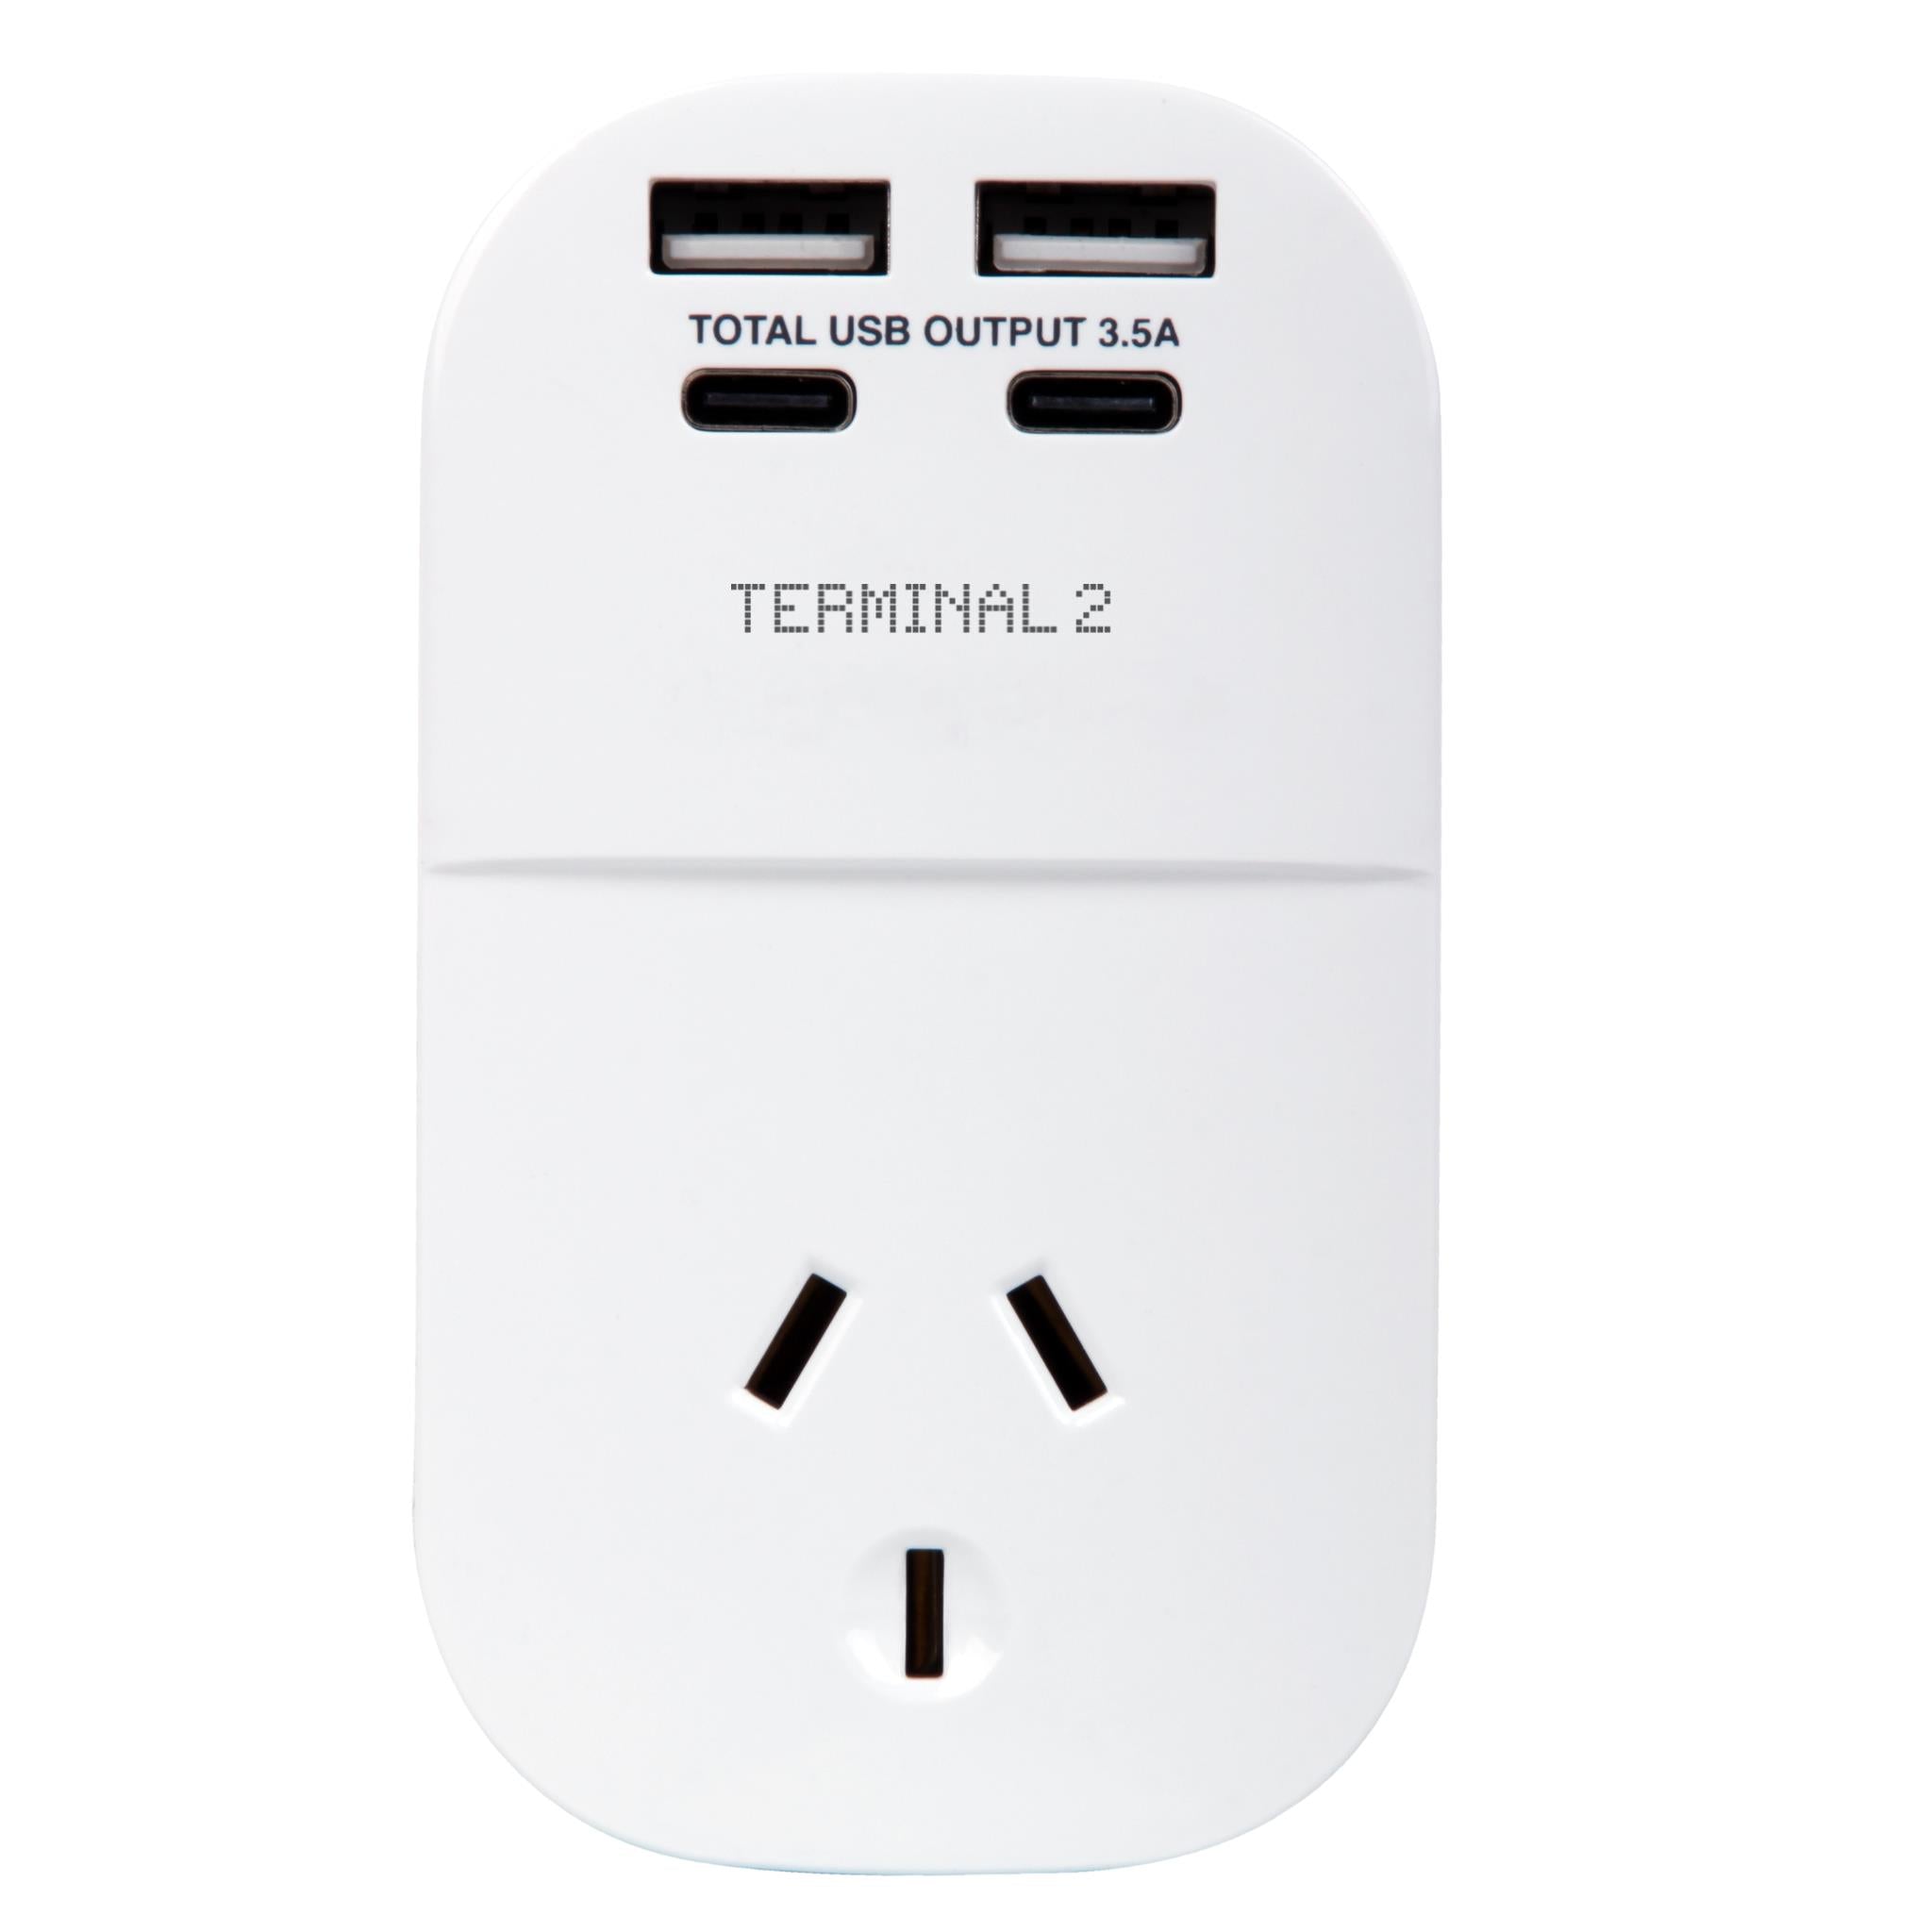 terminal 2 outbound travel adaptor with 4 usb ports for america, canada & more